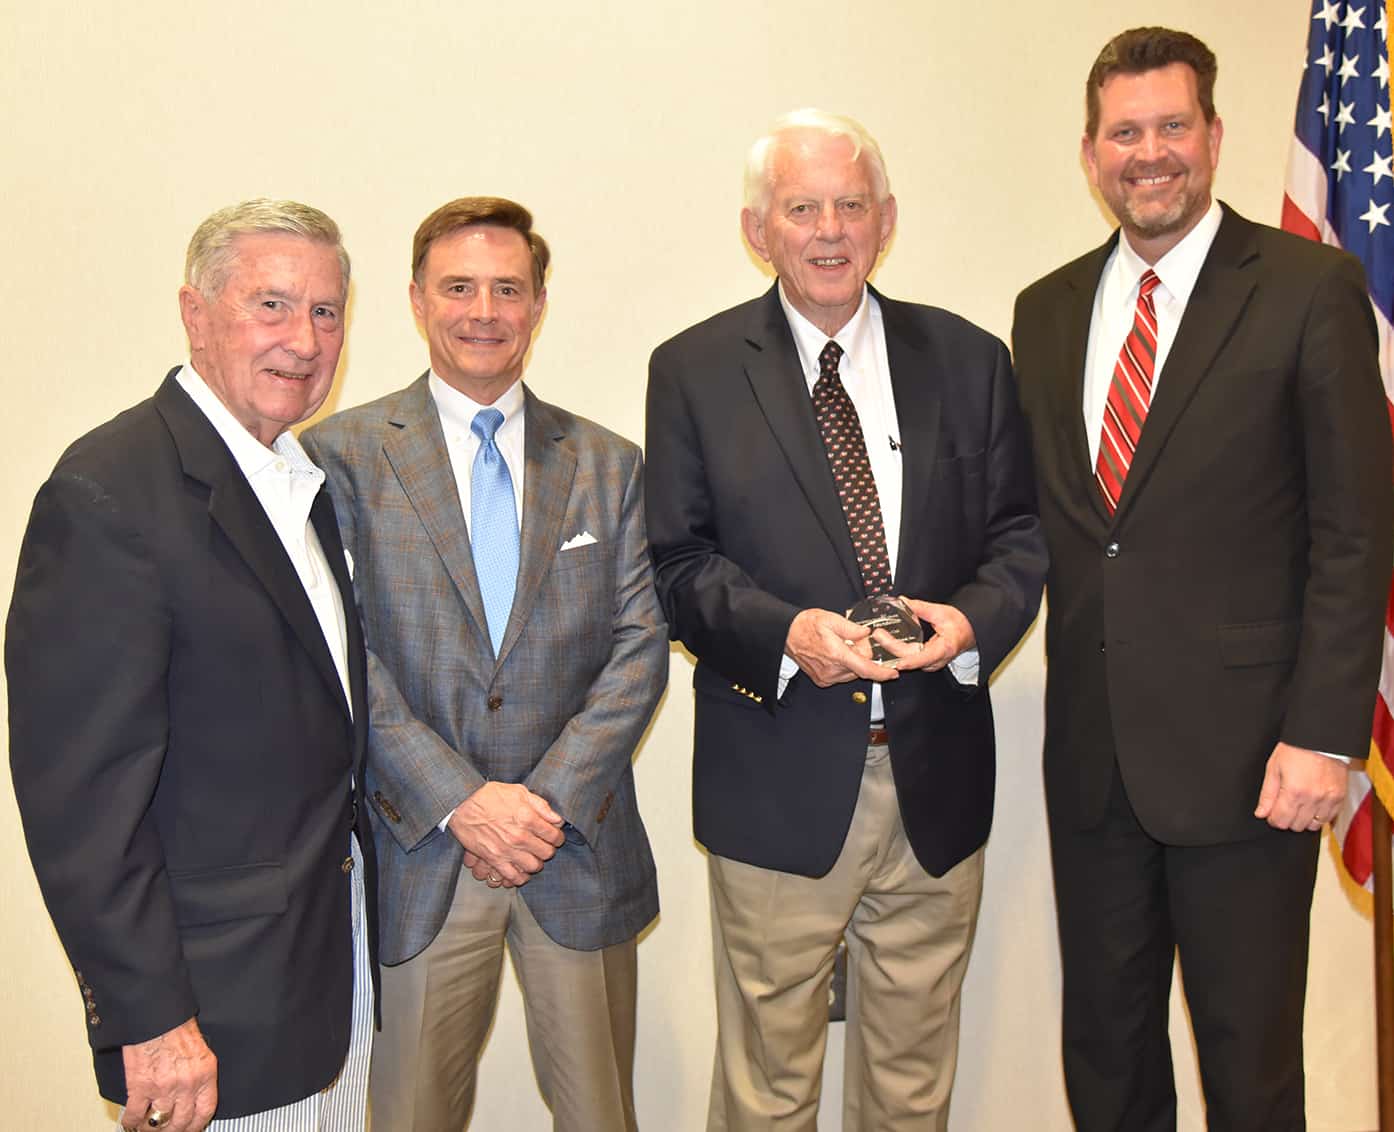 George Hooks, Rick Whaley, and Russell Thomas, Jr. with SGTC President Dr. John Watford.